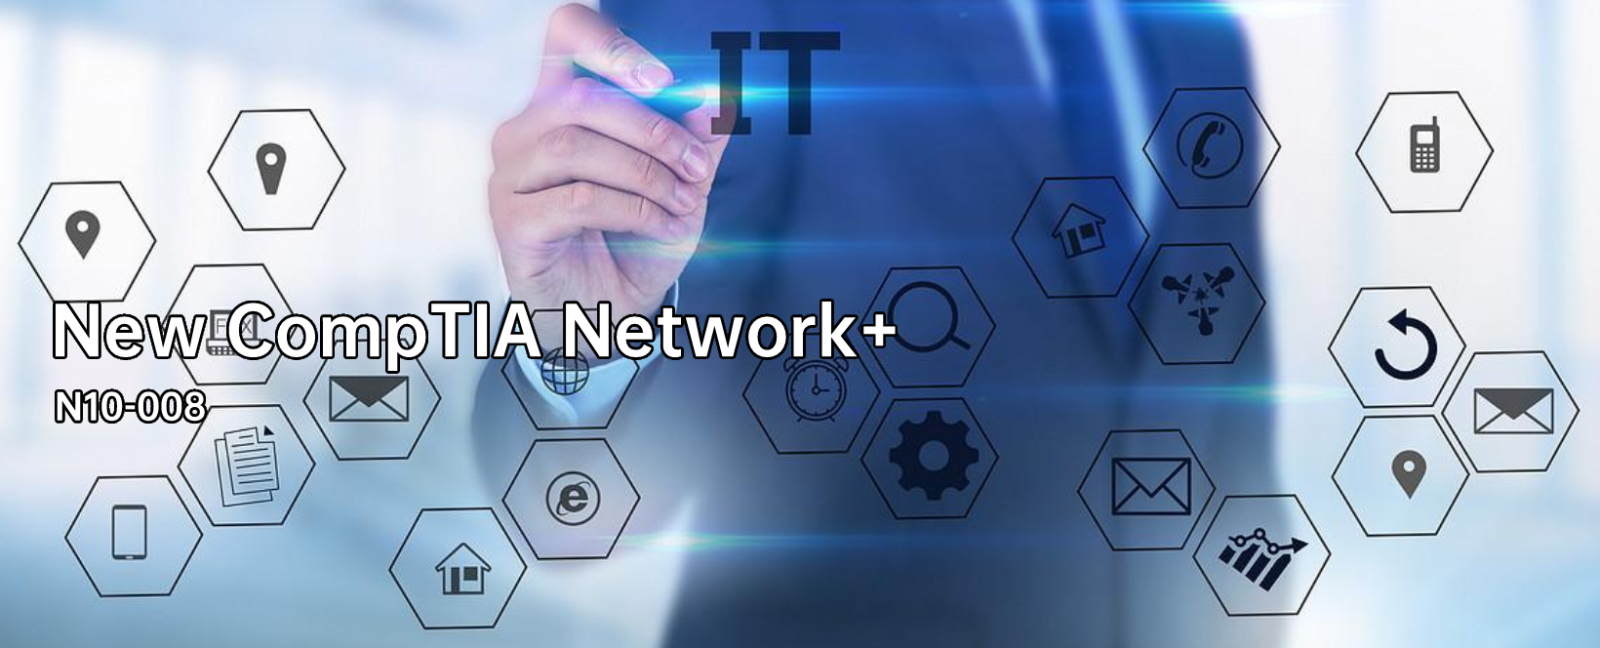 New CompTIA Network+ N10-008